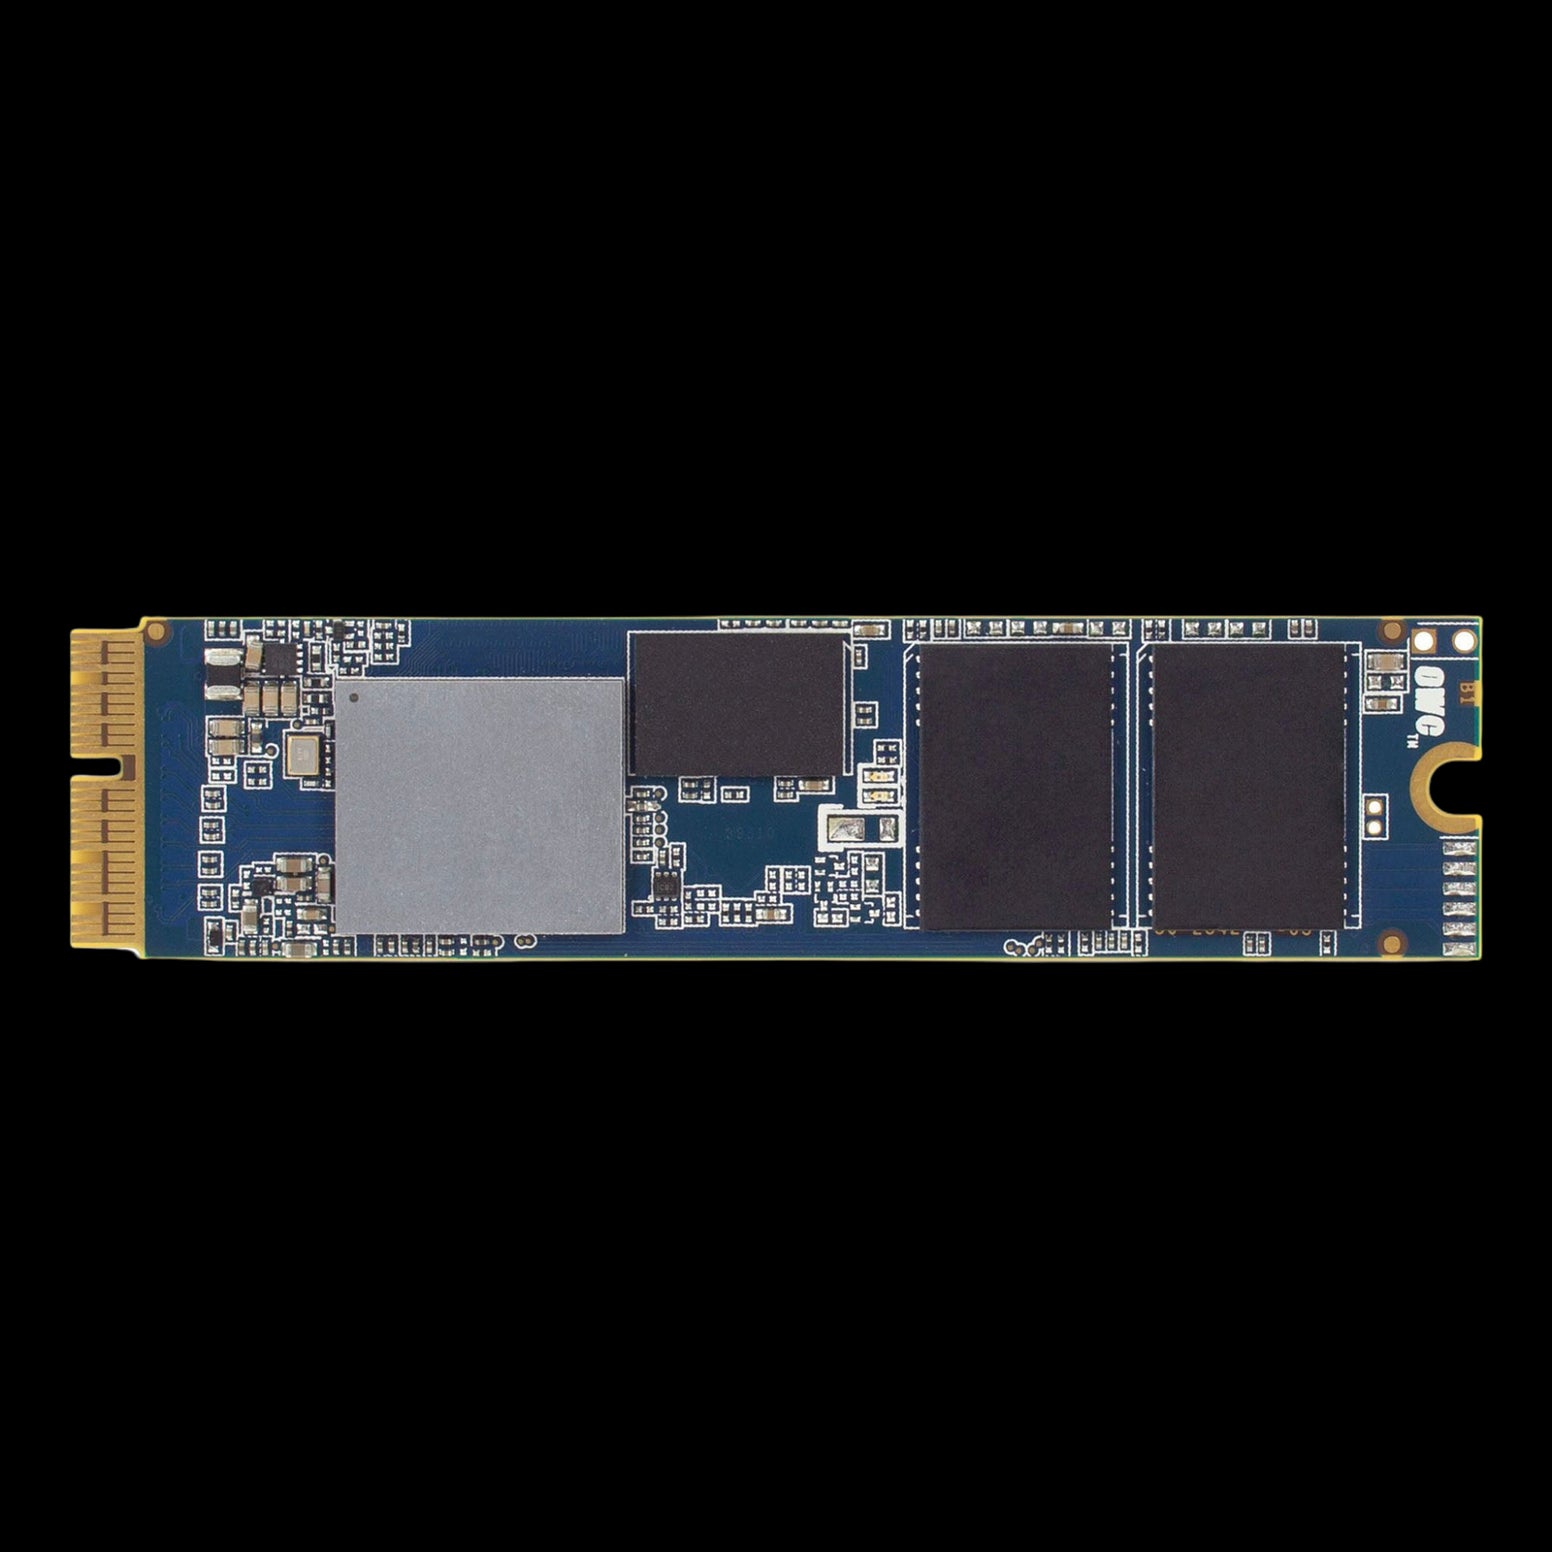 OWC 1TB Aura Pro X2 SSD with Upgrade Kit for Select 2013 and Later MacBook Air & MacBook Pro